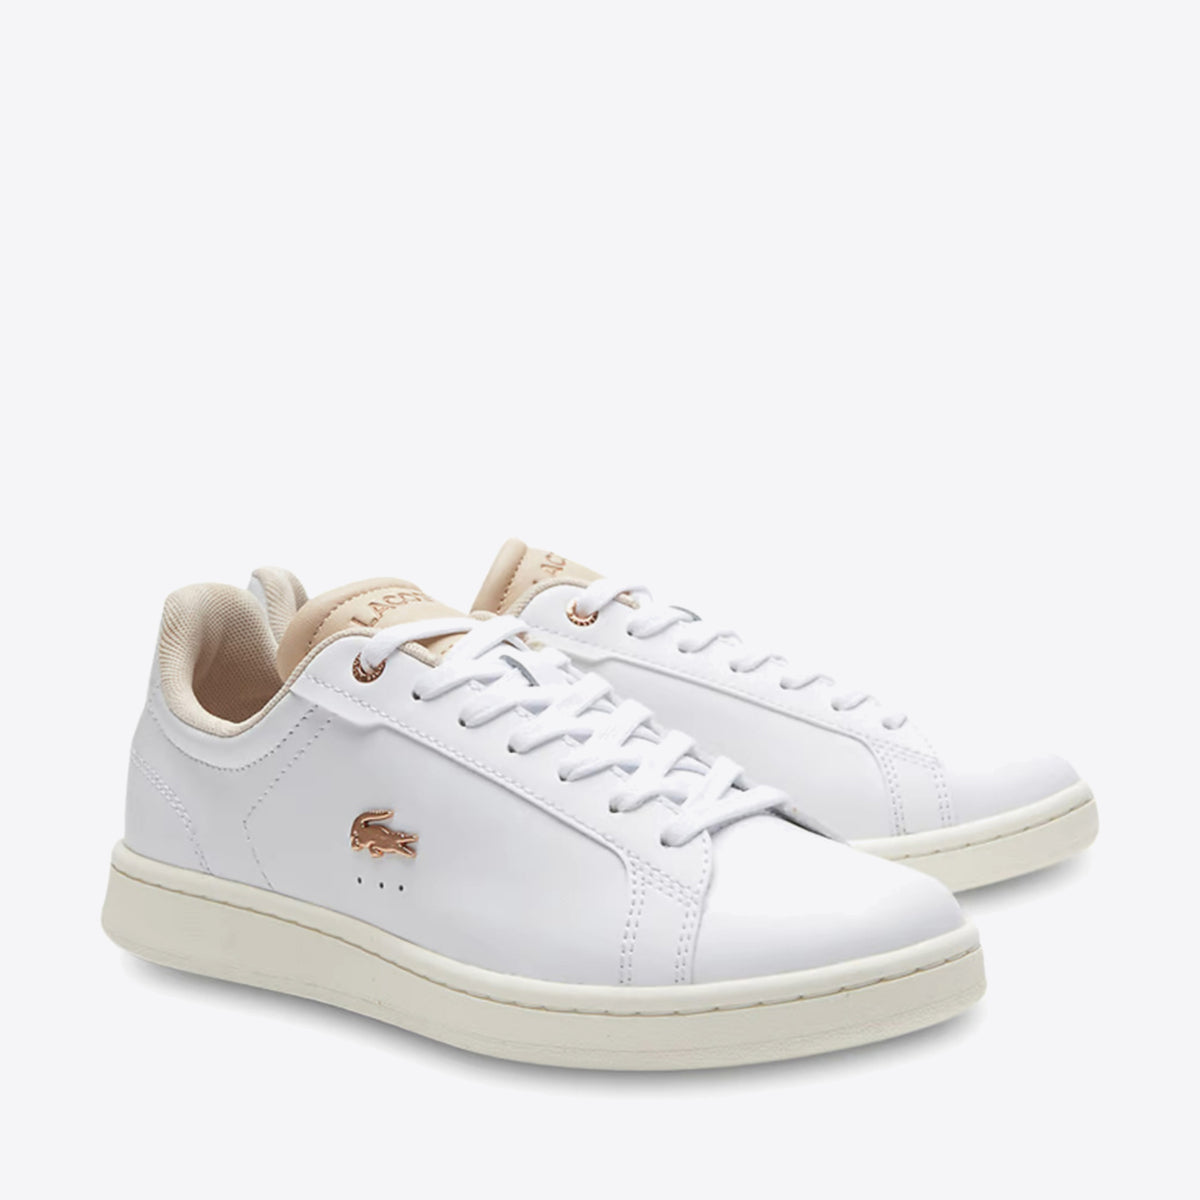 LACOSTE Carnaby Pro White/Off White - Image 2